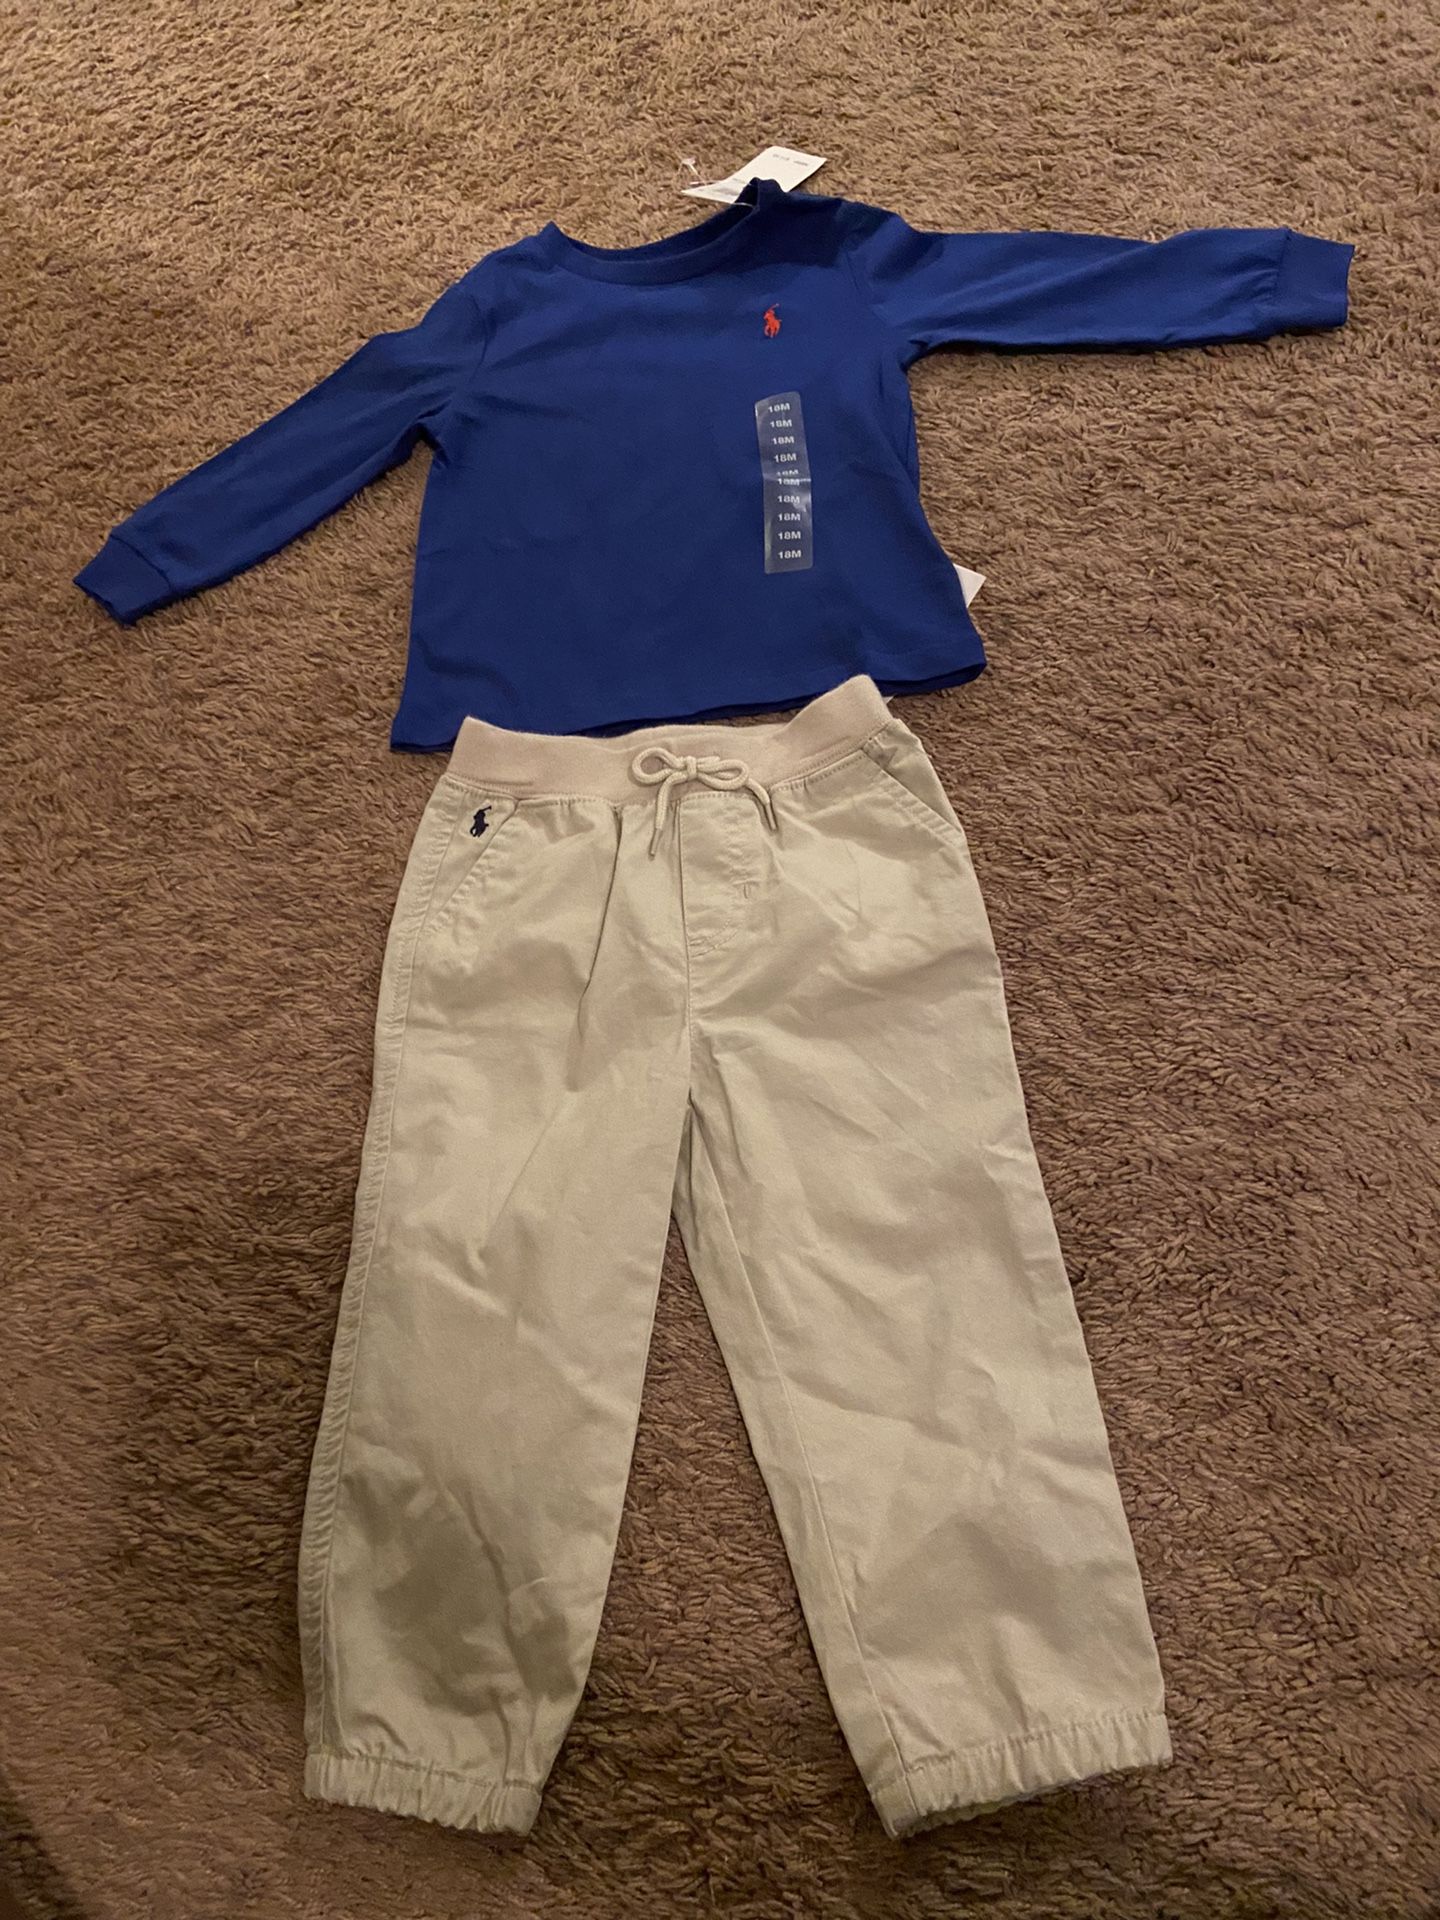 Boys Polo Outfit Size 18 Months 